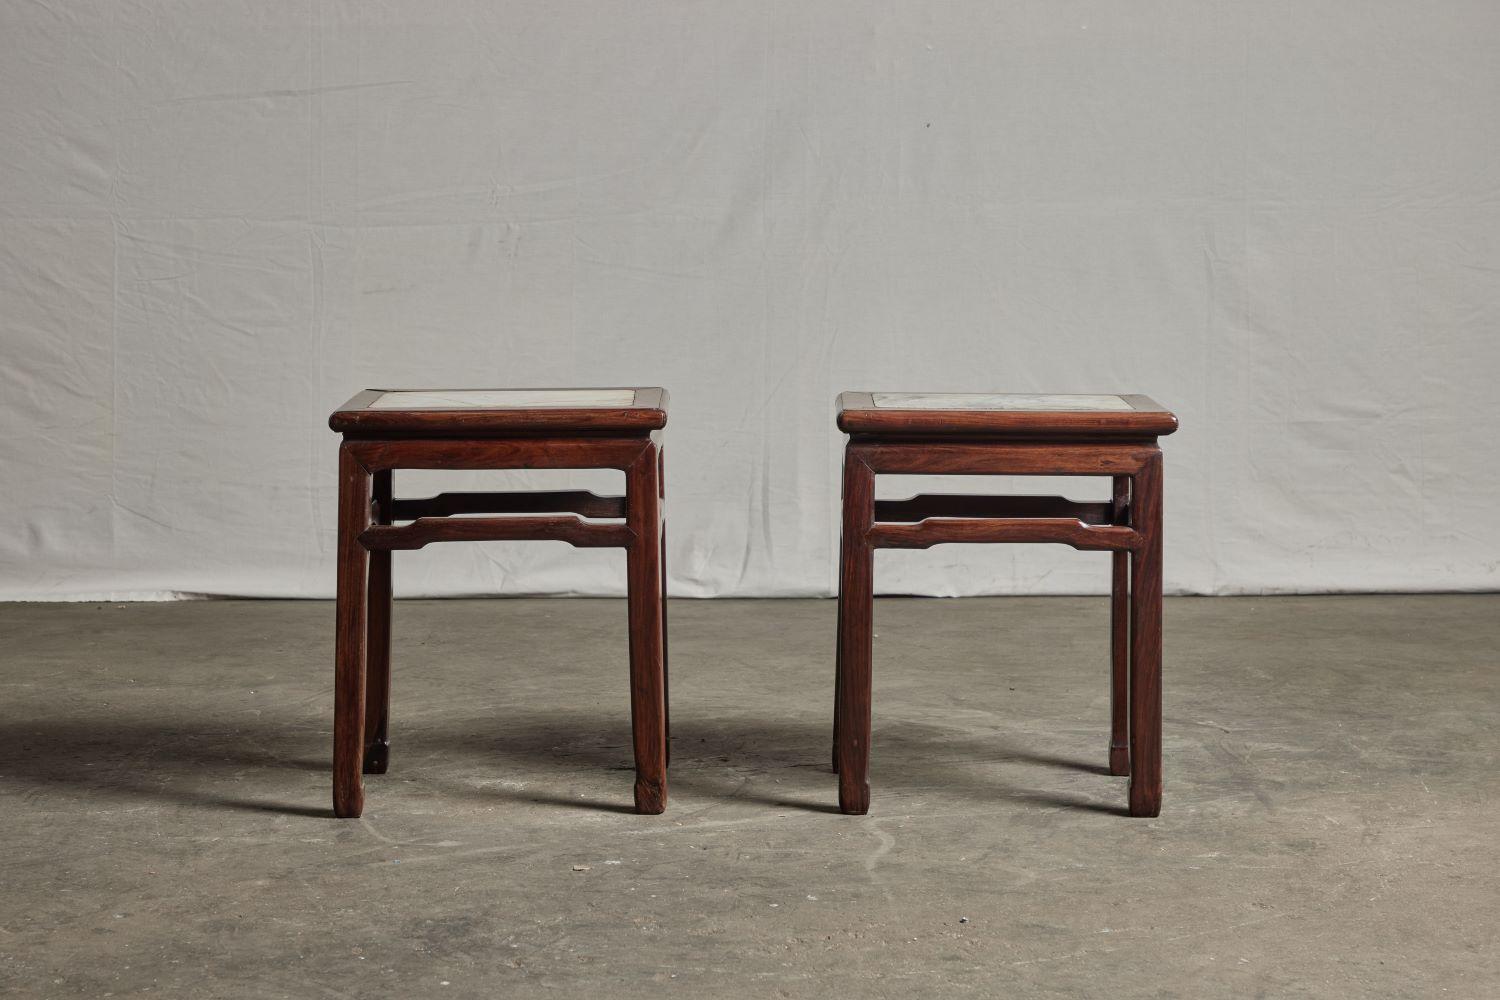 Pair of rosewood tea tables from Kwangtung. “Hong Mu” Pair only. With grey marble top.